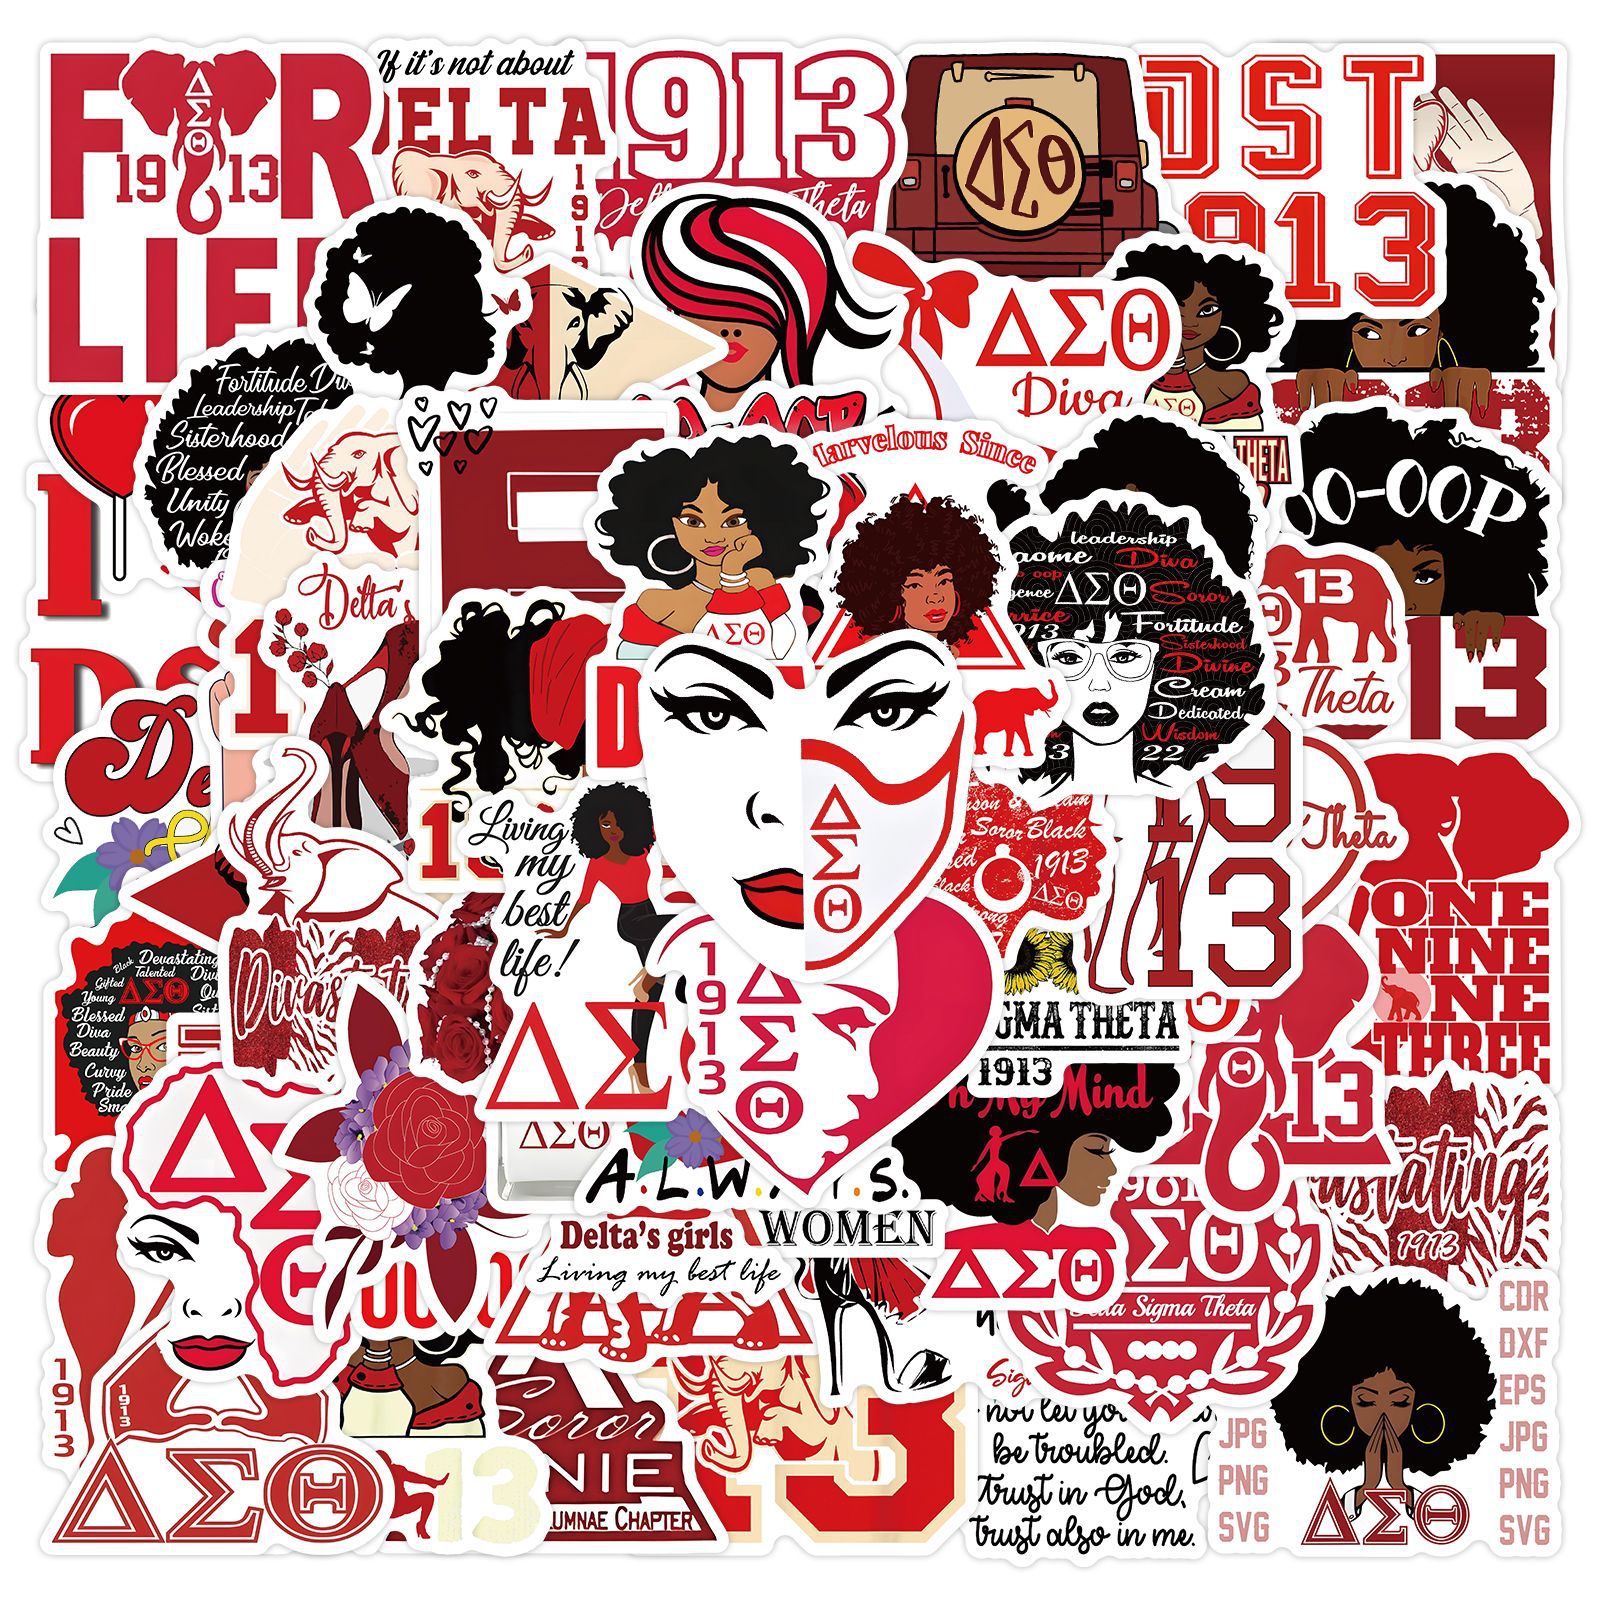 60pcs Delta Sigma Theta Sorority stickers 1913 DST Graffiti Sticker for Laptop Motorcycle Luagage Decal Guitar Stickers wholesalers